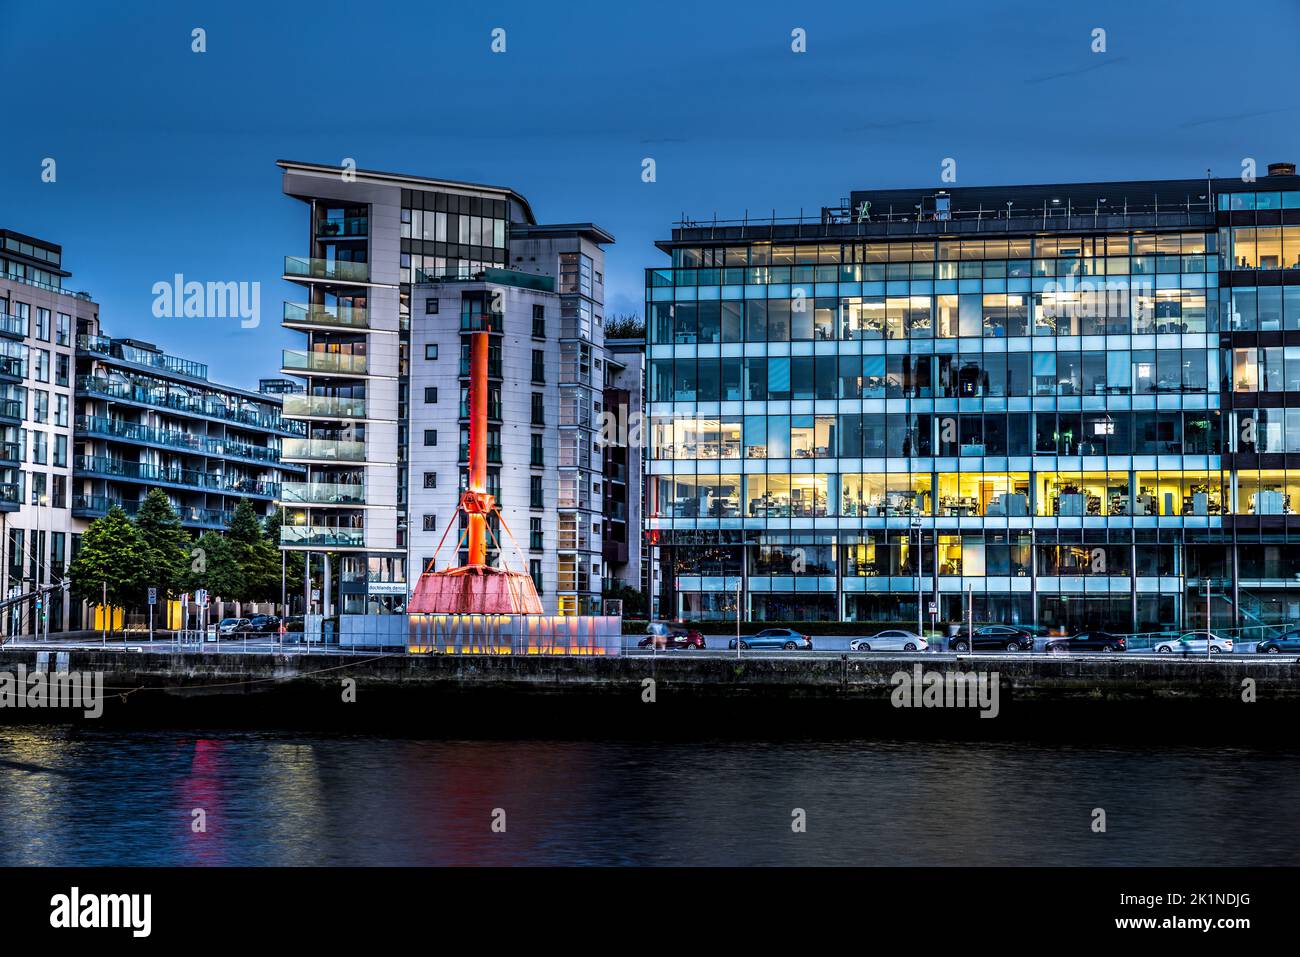 Red Diving bell at night Dublin Ireland Stock Photo